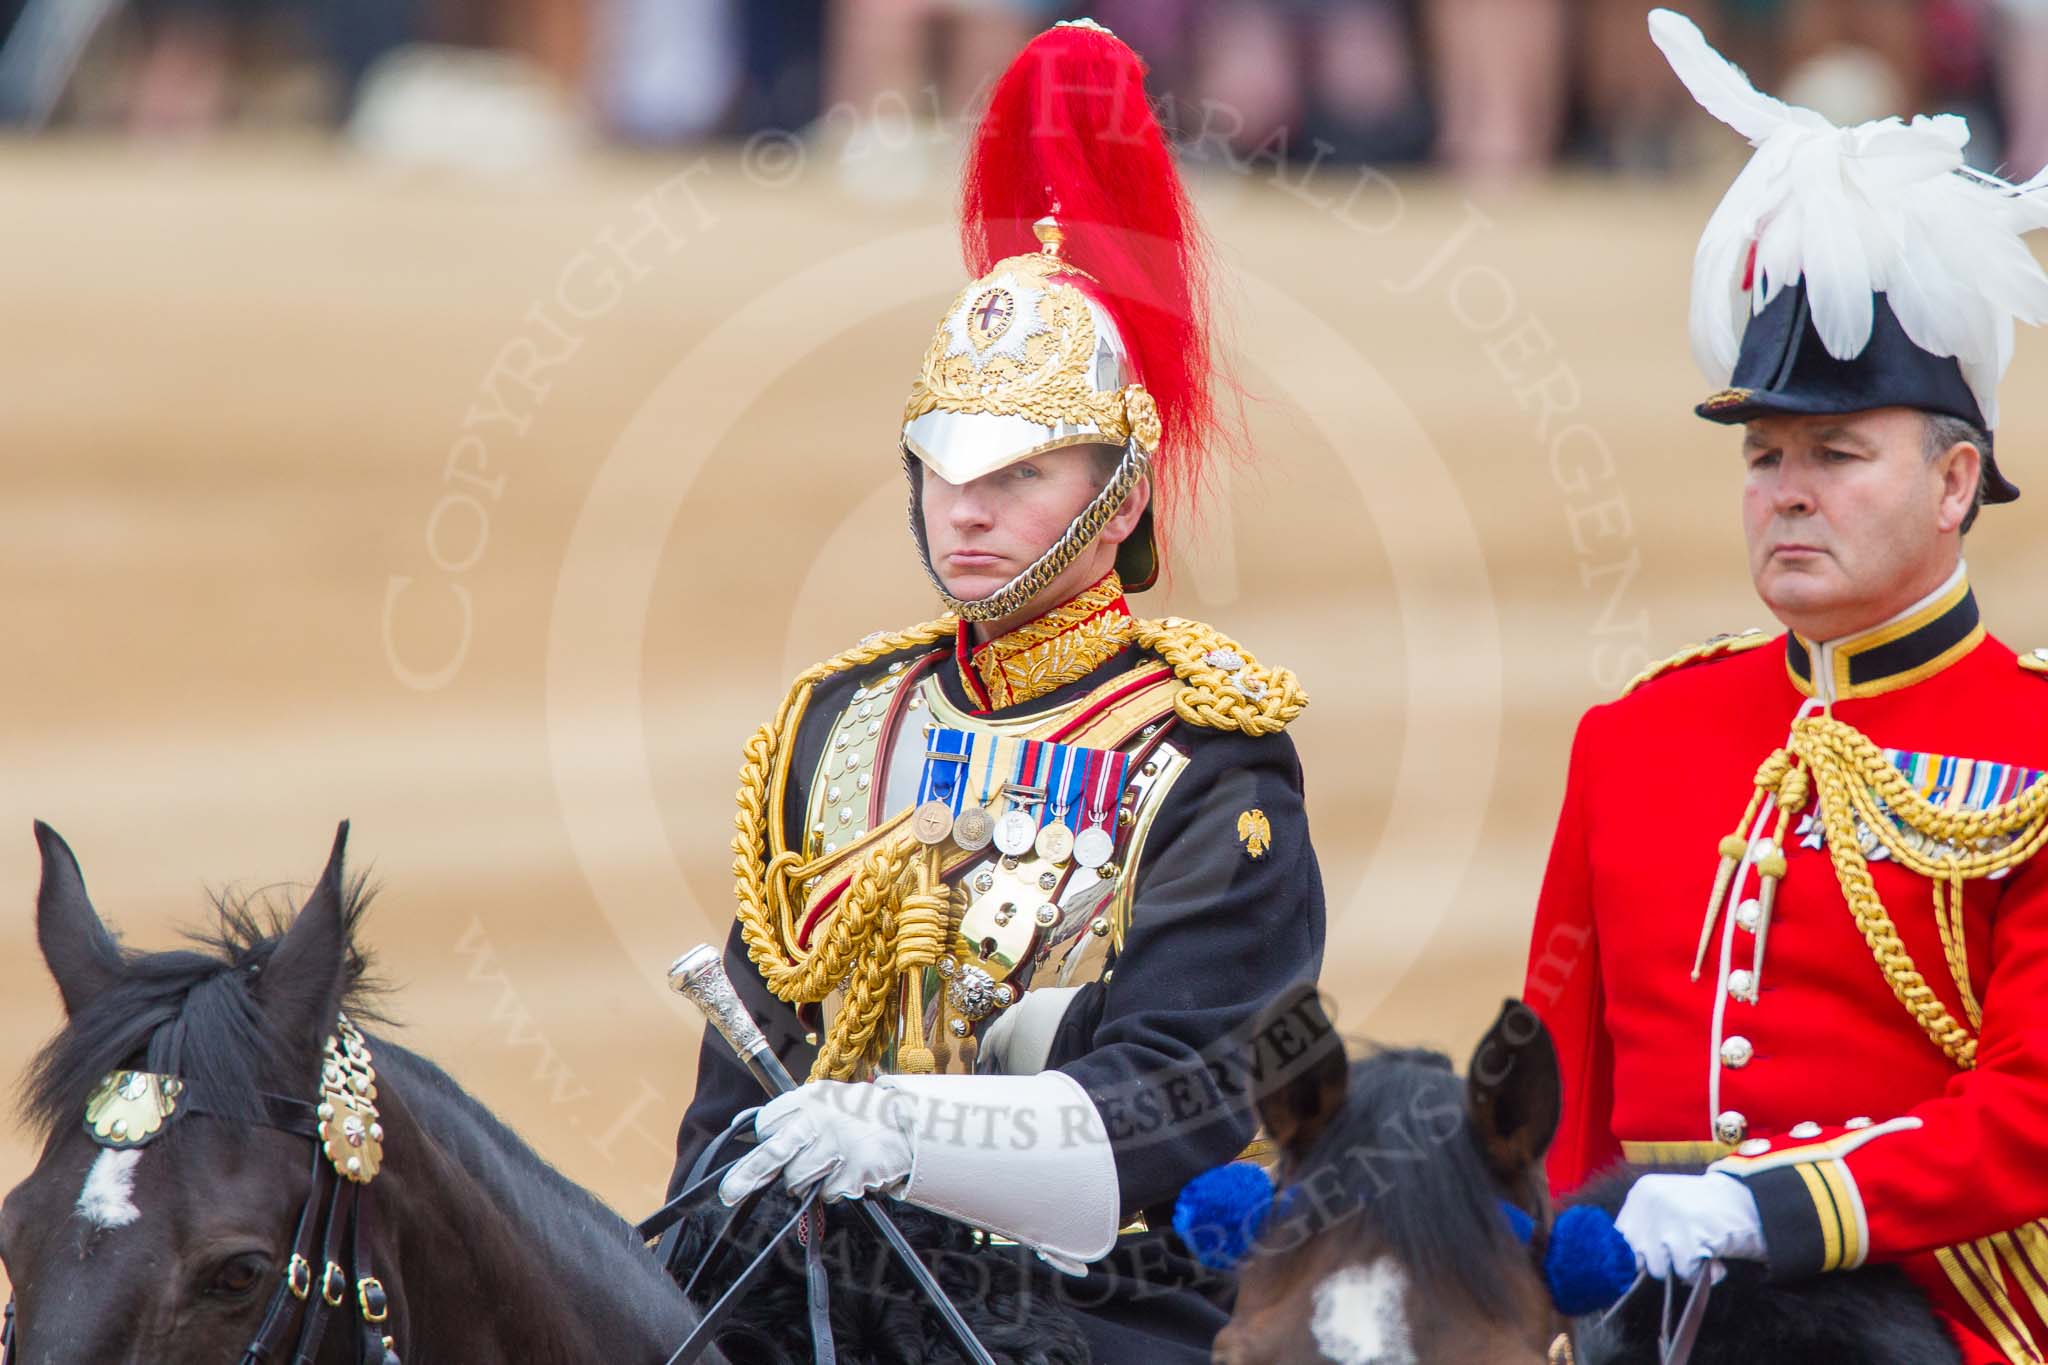 Trooping the Colour 2014.
Horse Guards Parade, Westminster,
London SW1A,

United Kingdom,
on 14 June 2014 at 11:03, image #395